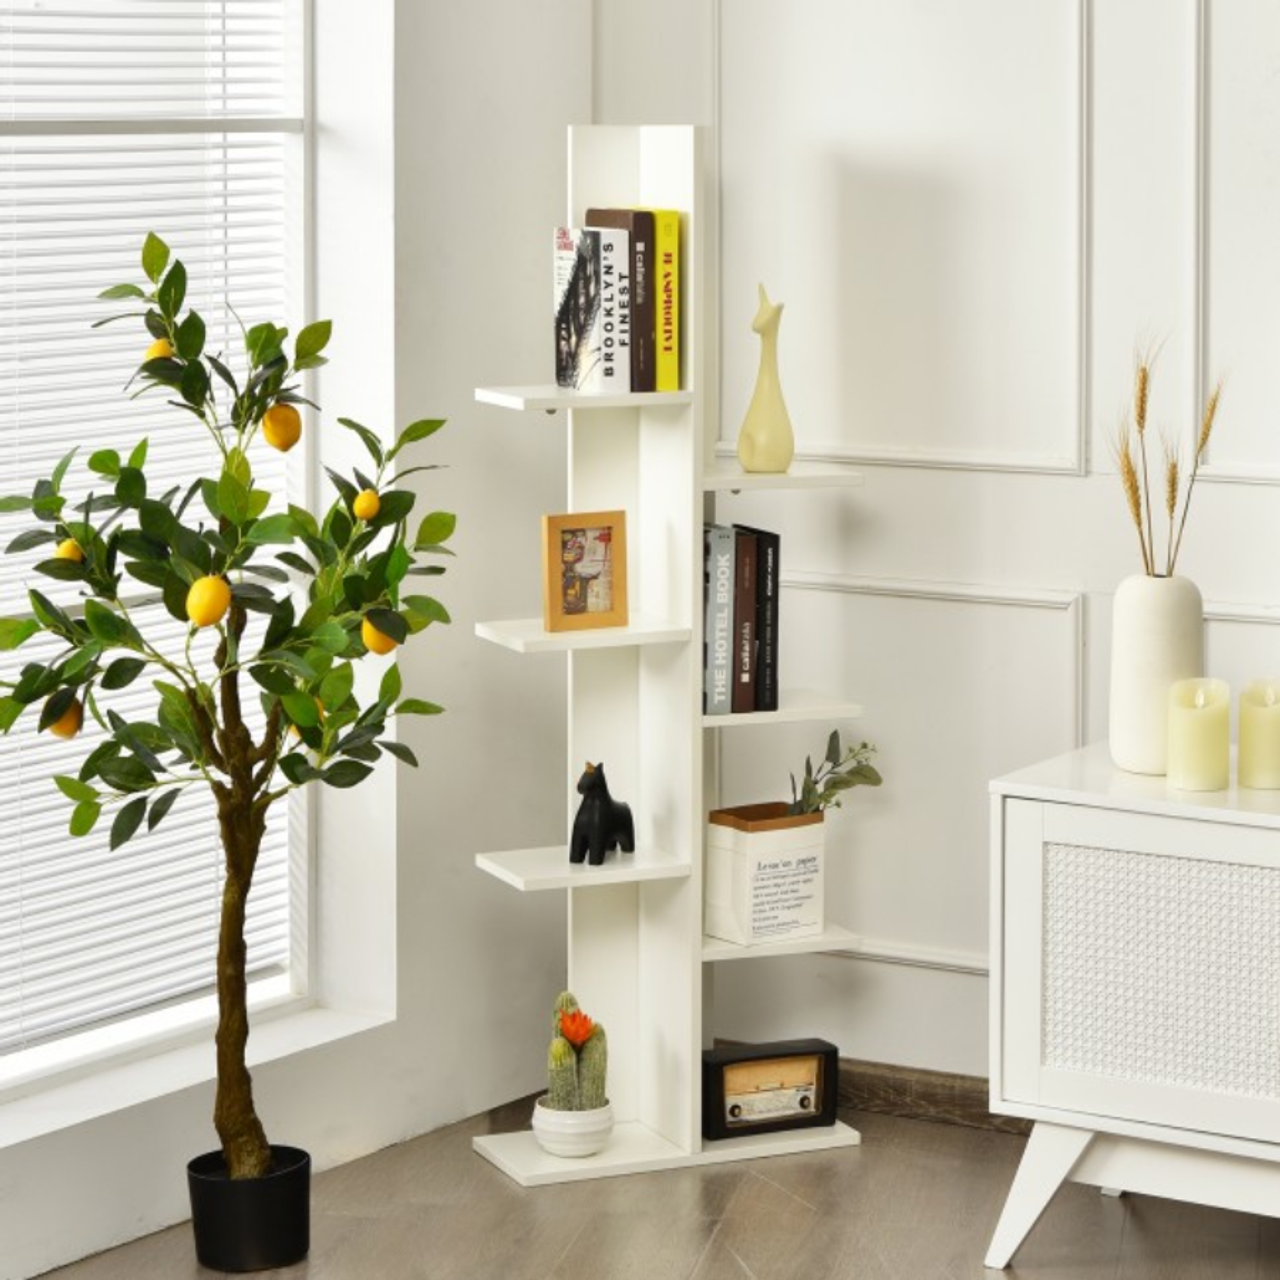 Open Concept 7-Tier Display Bookcase product image